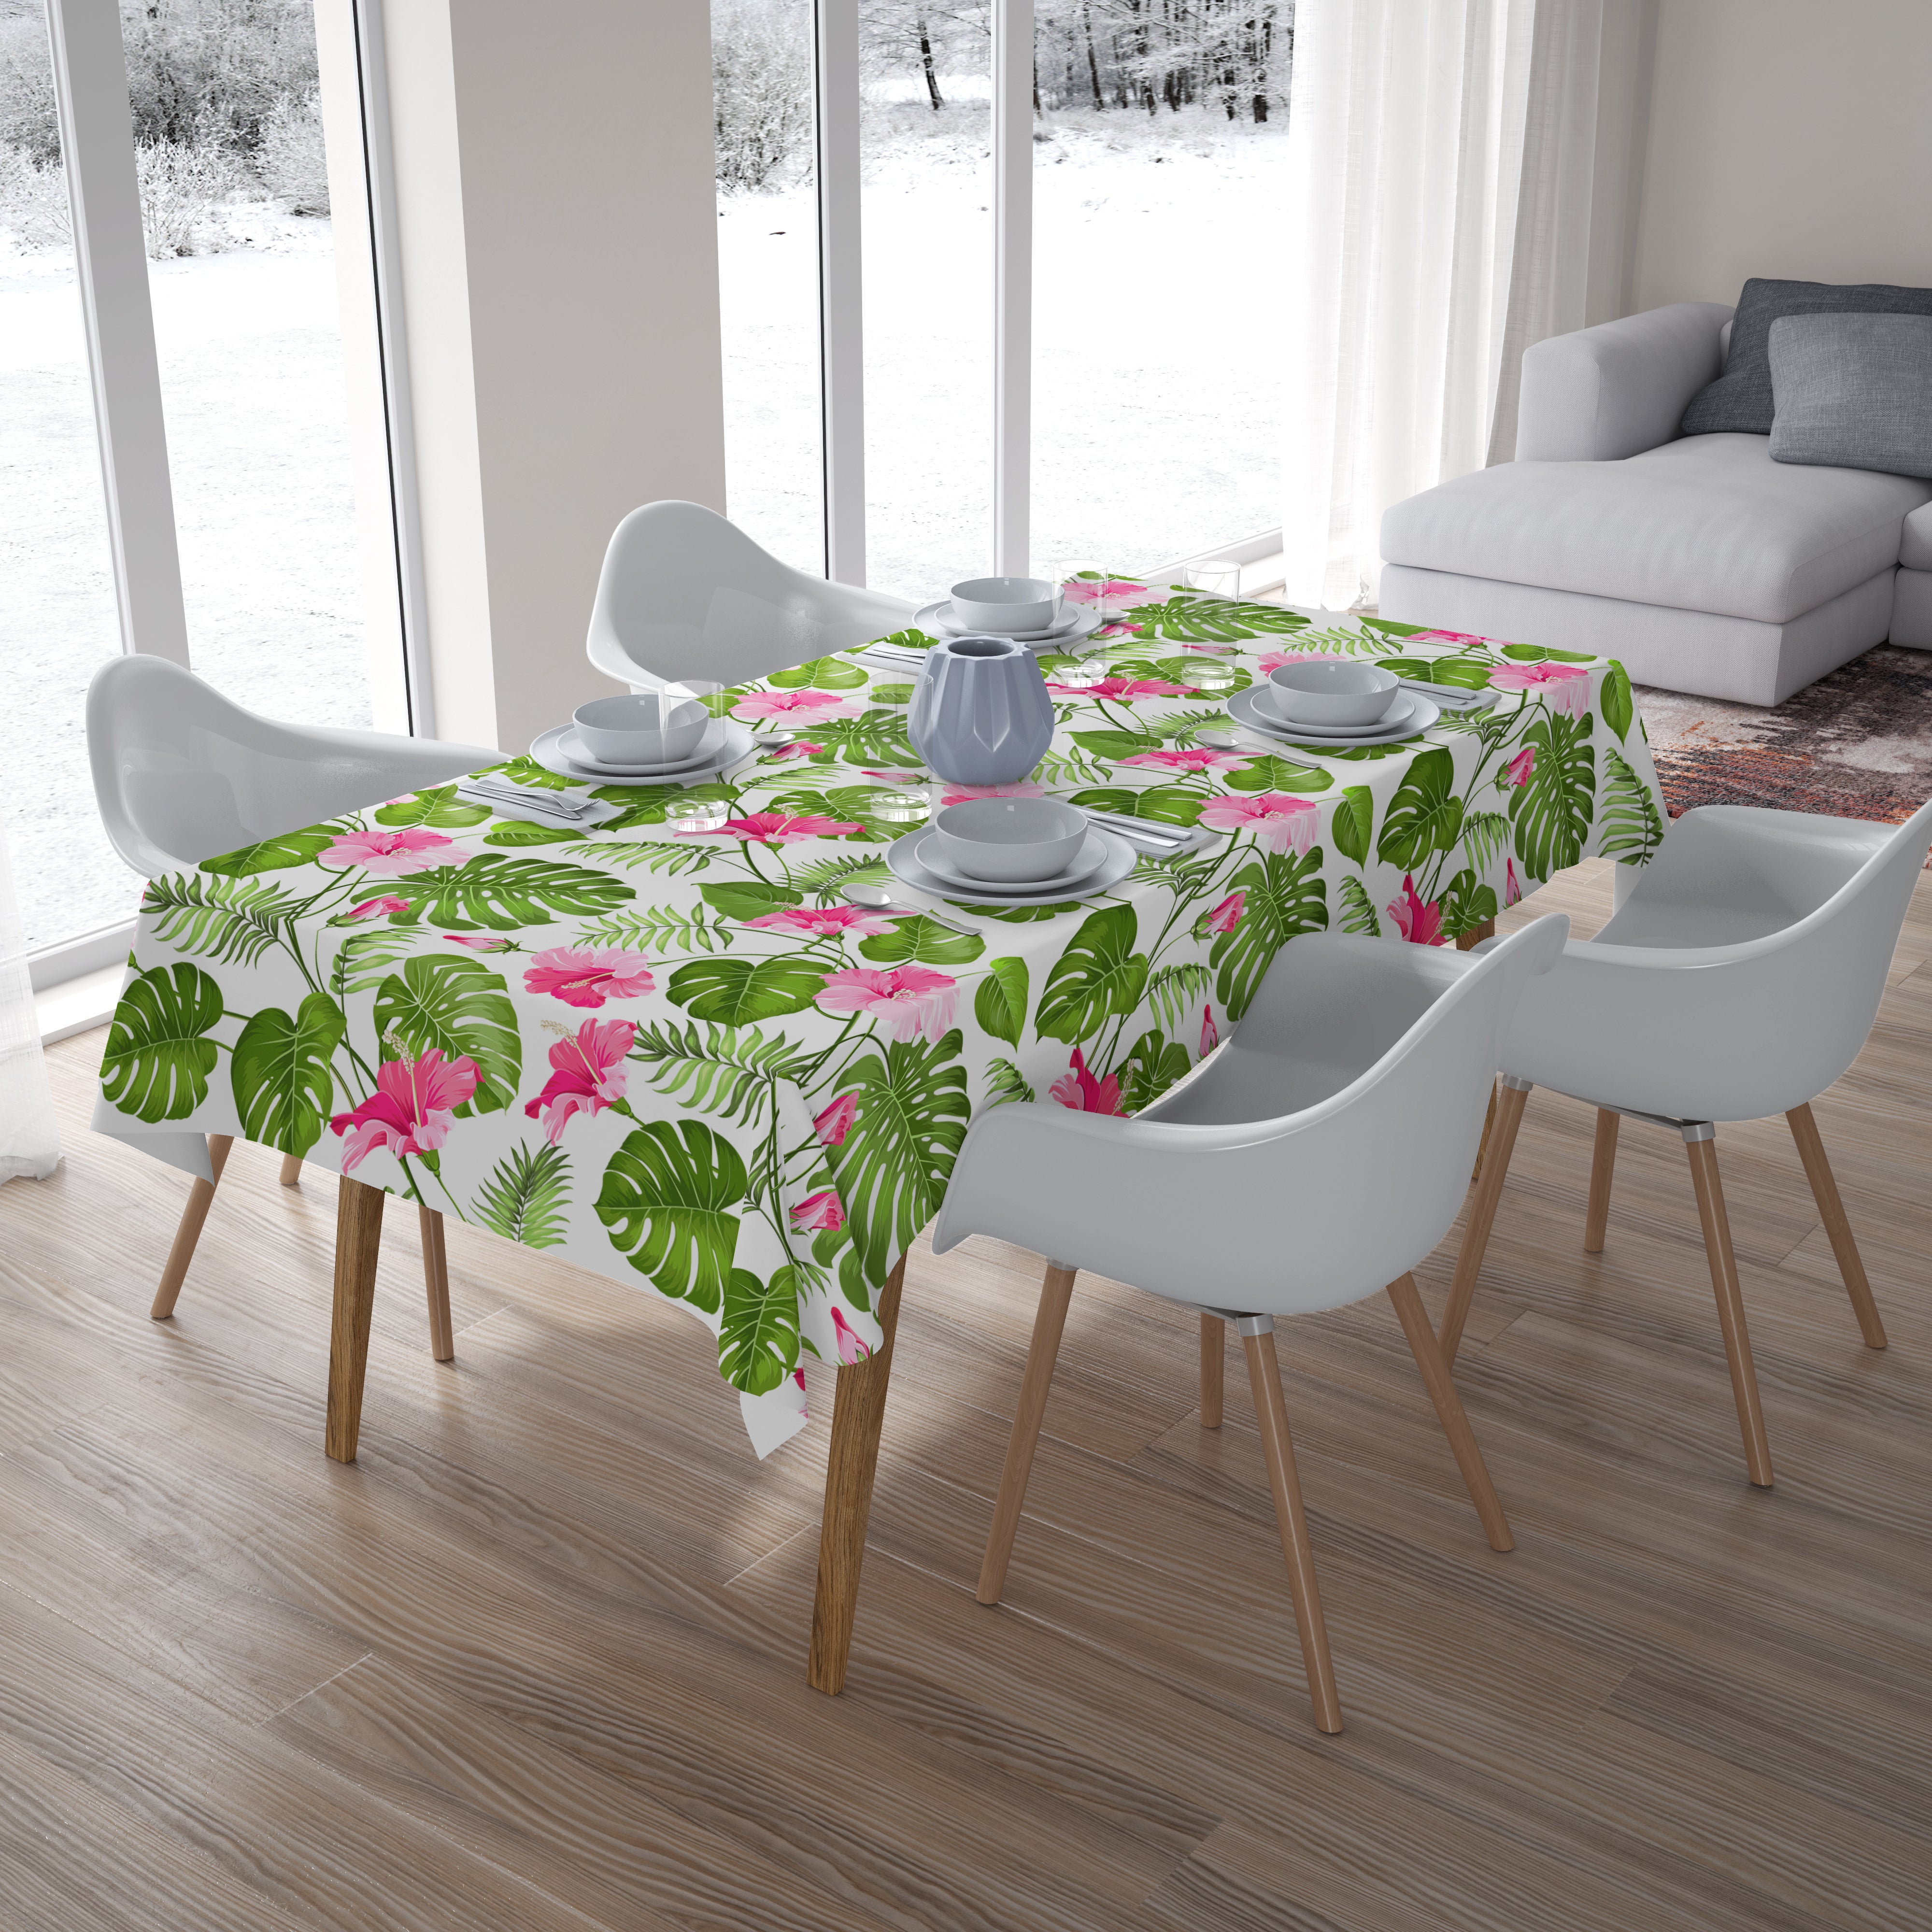 Tablecloth Tropical Flowers on the White - Wellmira